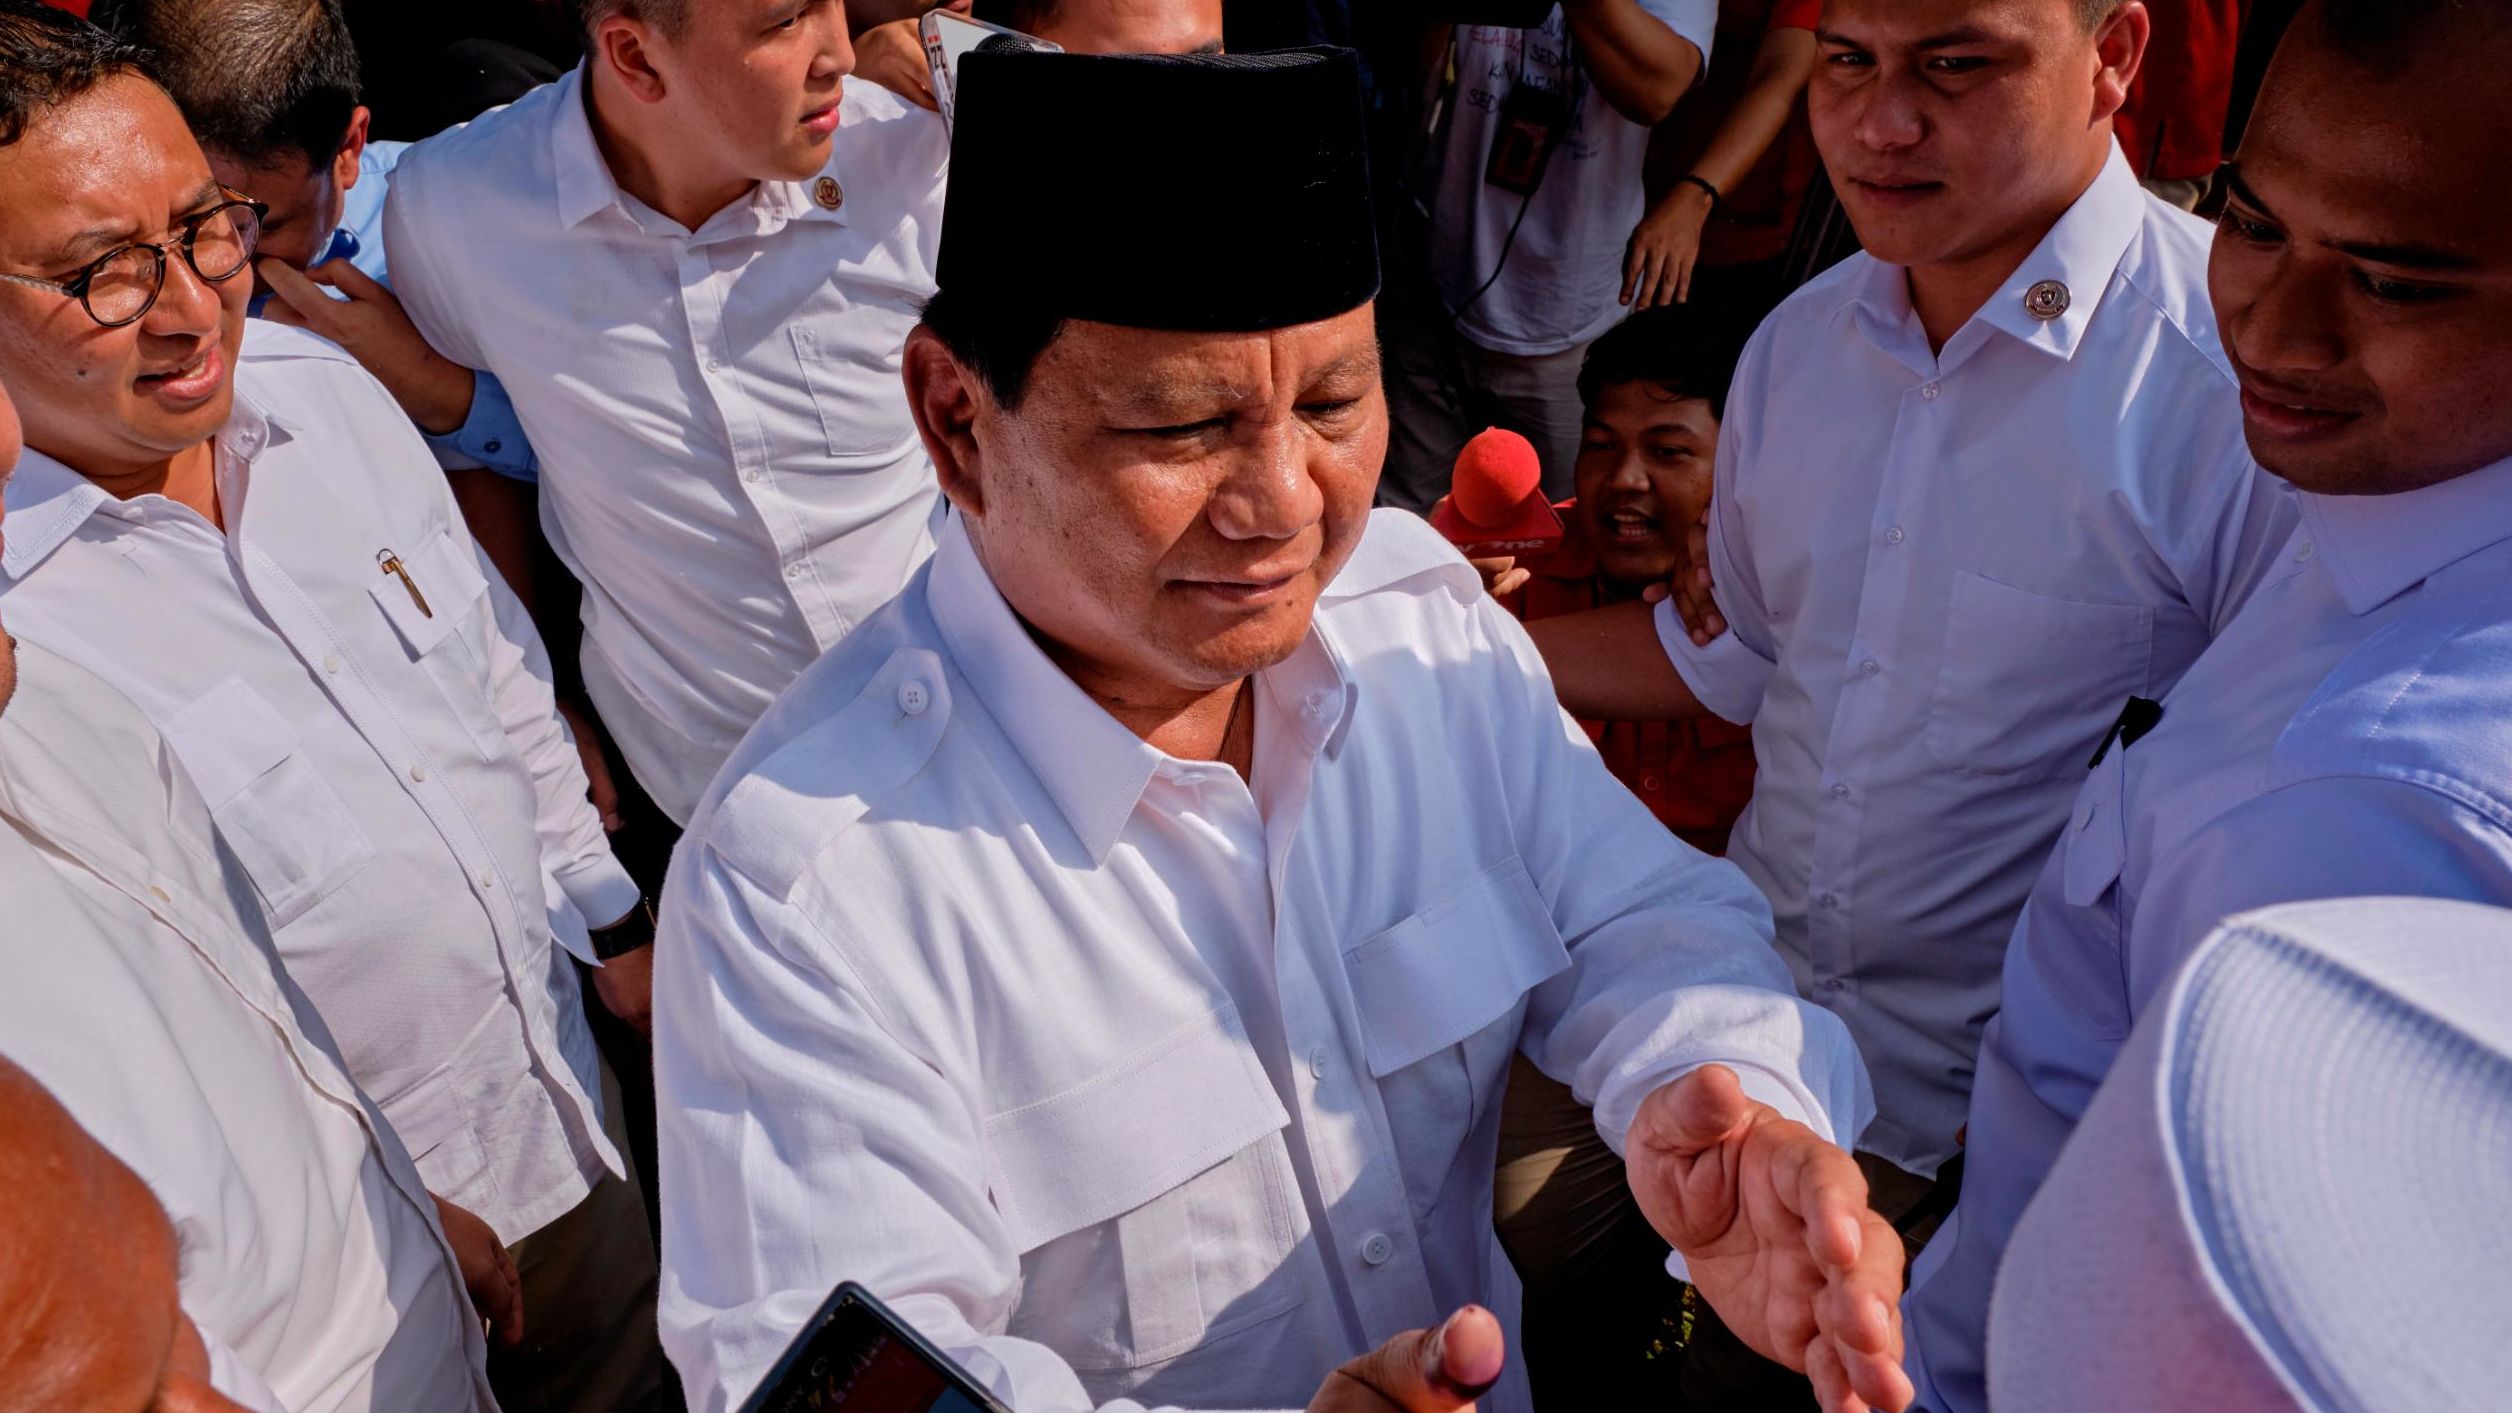 Indonesian Presidential candidate Prabowo Subianto shakes hands with voters after casting his vote at a polling station on April 17, 2019 in Babakan Madang, Indonesia. 